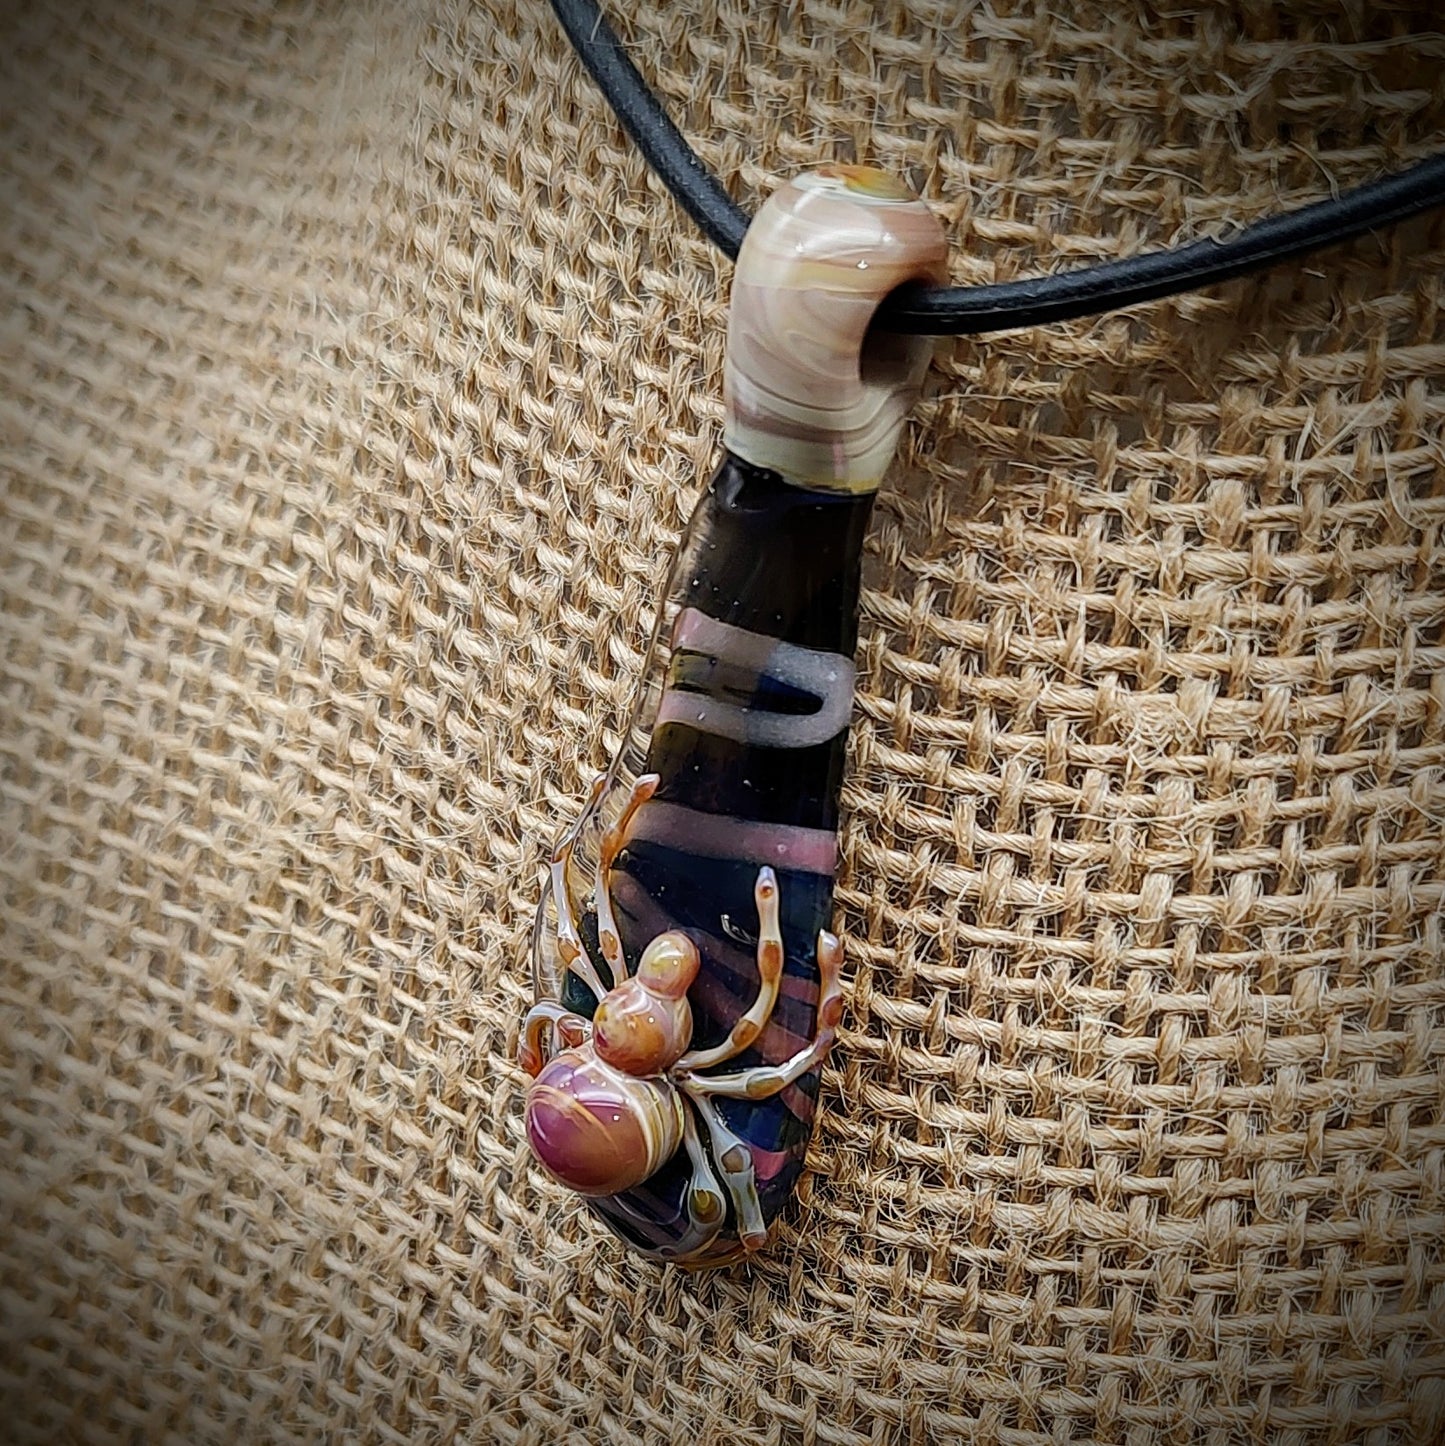 Fumed Spider Pendant (Ready To Ship)